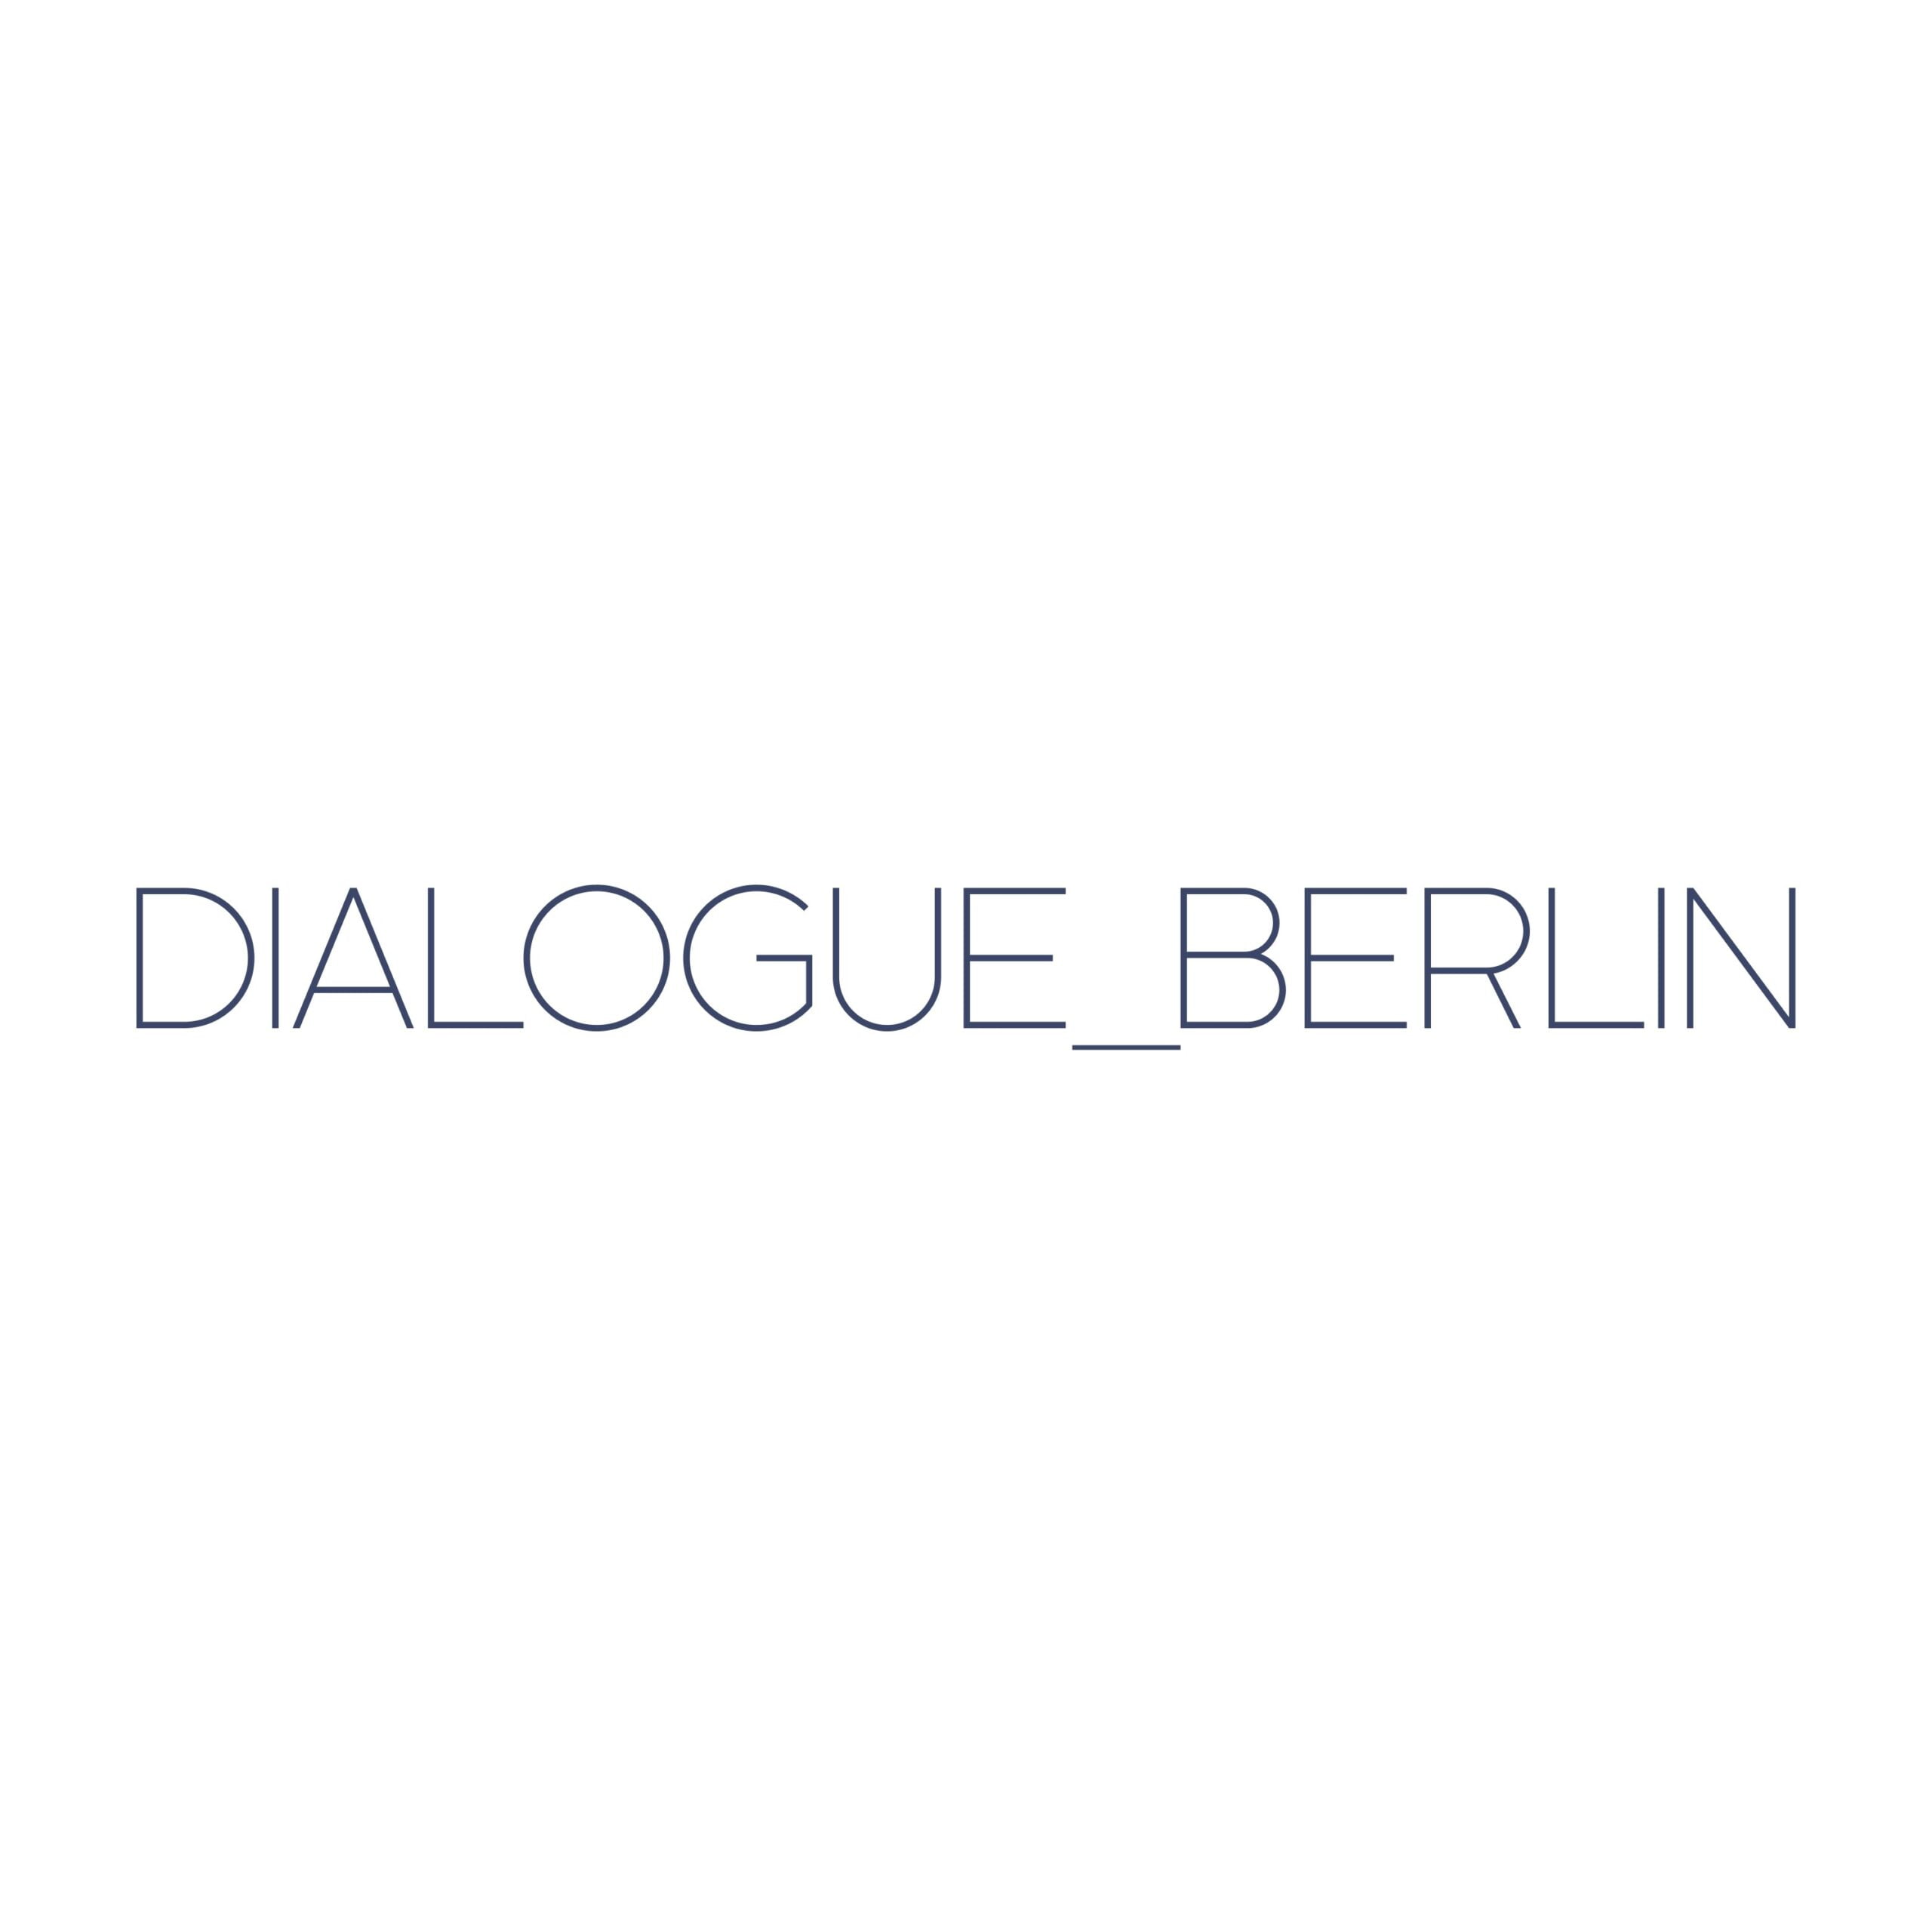 ALLi News – Dramatic Rights With Dialogue Berlin, Member Discounts And A Q&A…